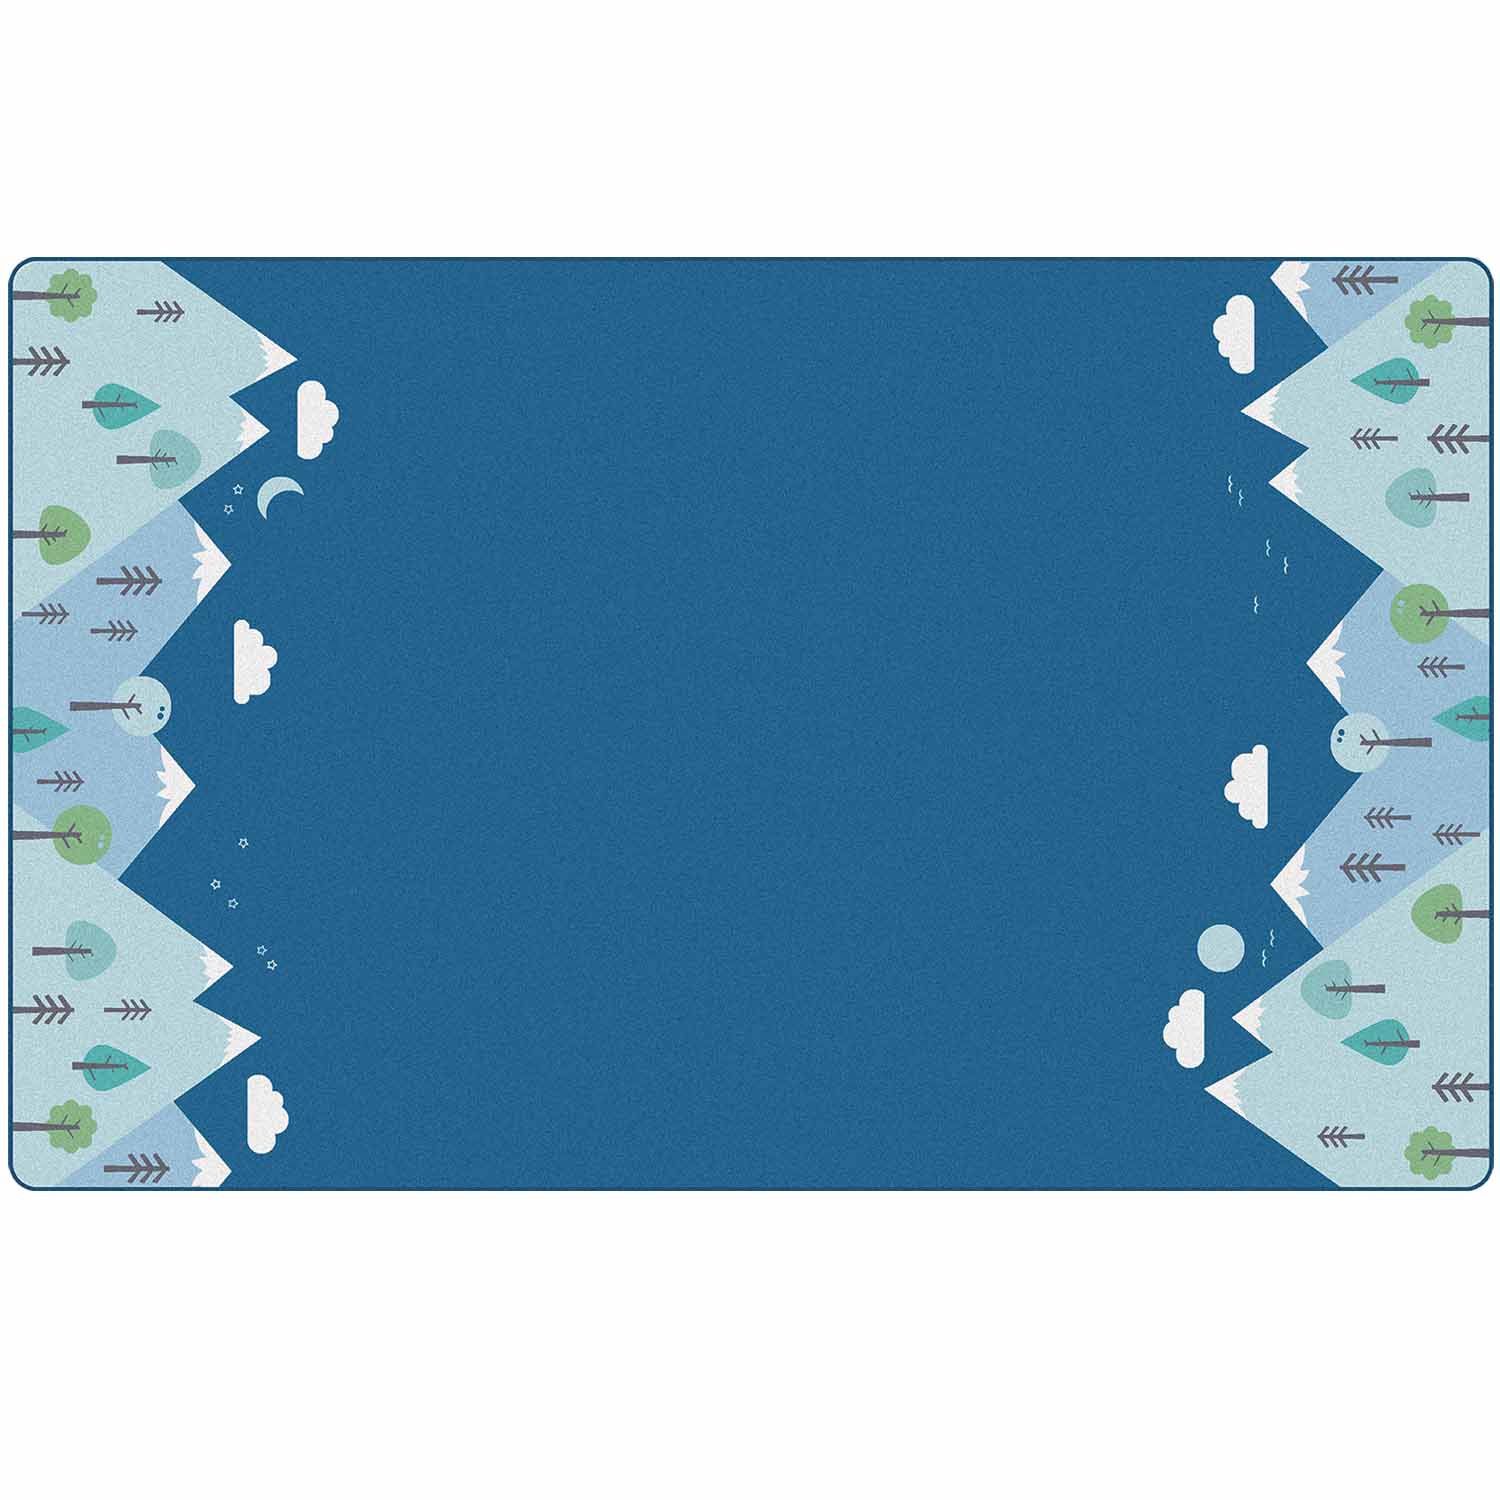 KIDSoft™ Tranquil Mountain Rug, Blue 6' x 9' Rectangle